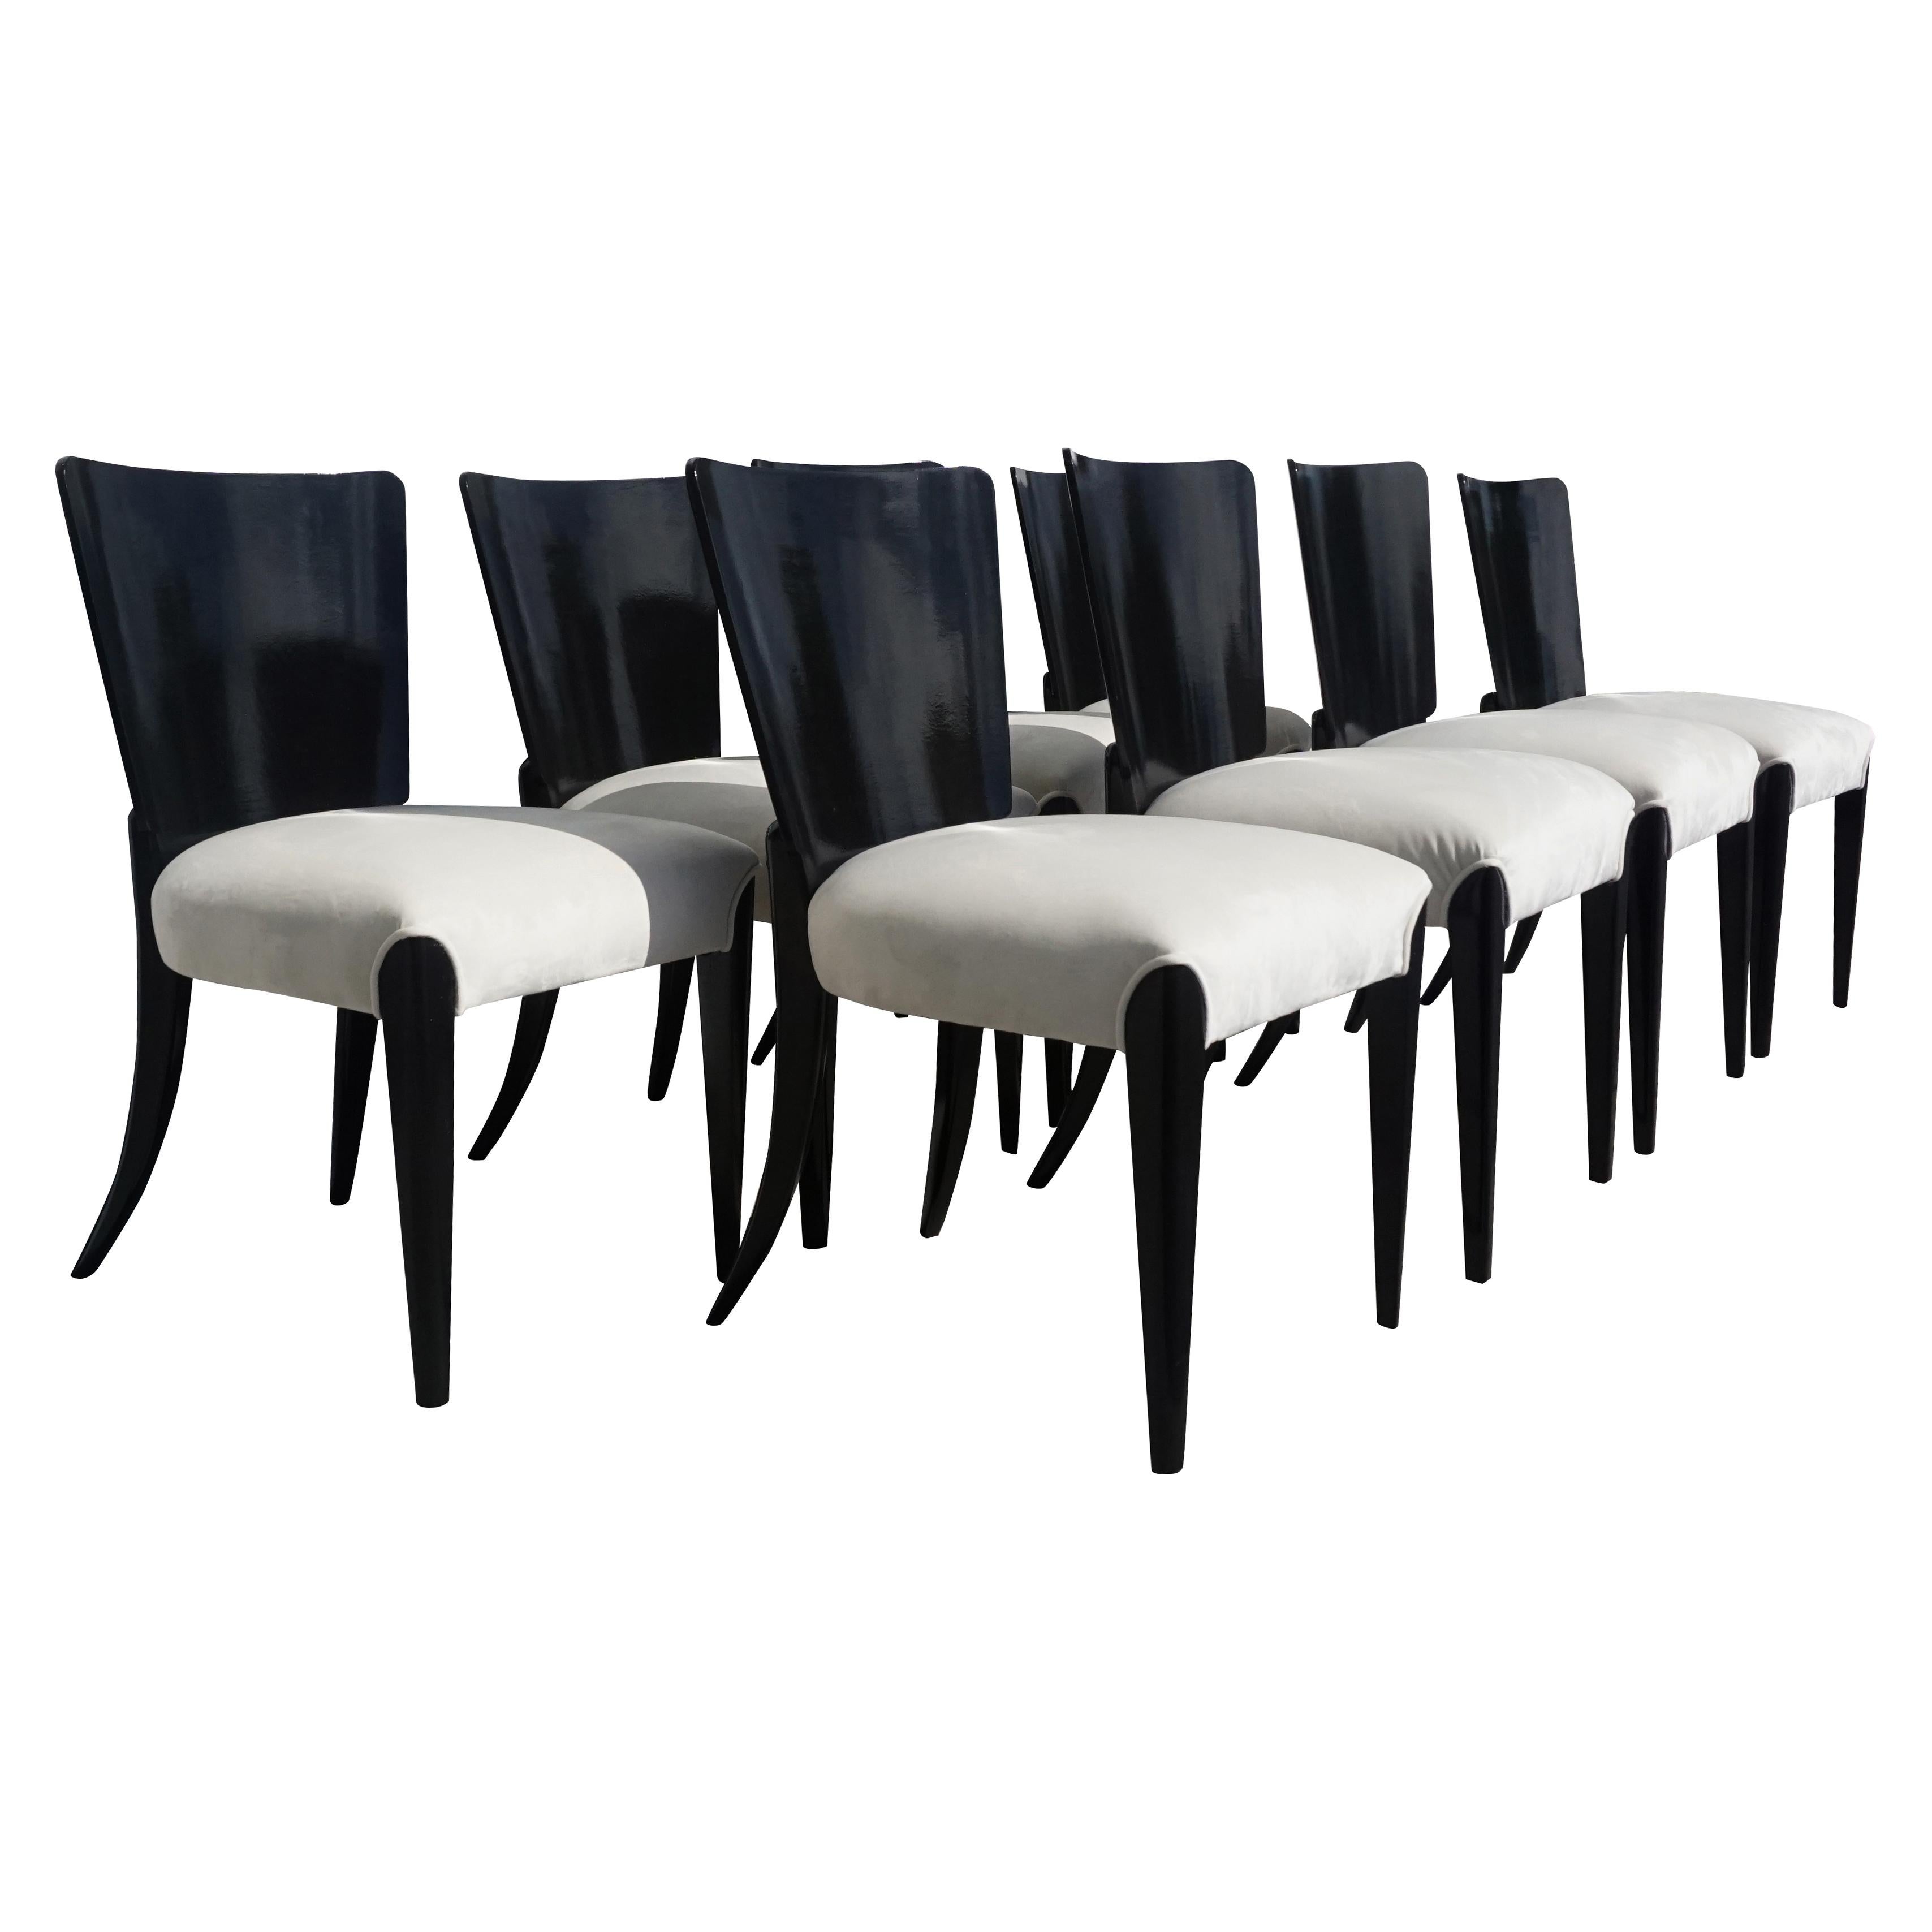 A very rare set of eight ebonized Halabala Art Deco chairs hand polished with shellac, Model H 214, in good condition. The black dining chairs are upholstered in a white suede leather. Wear consistent with age and use, circa 1930, Czech